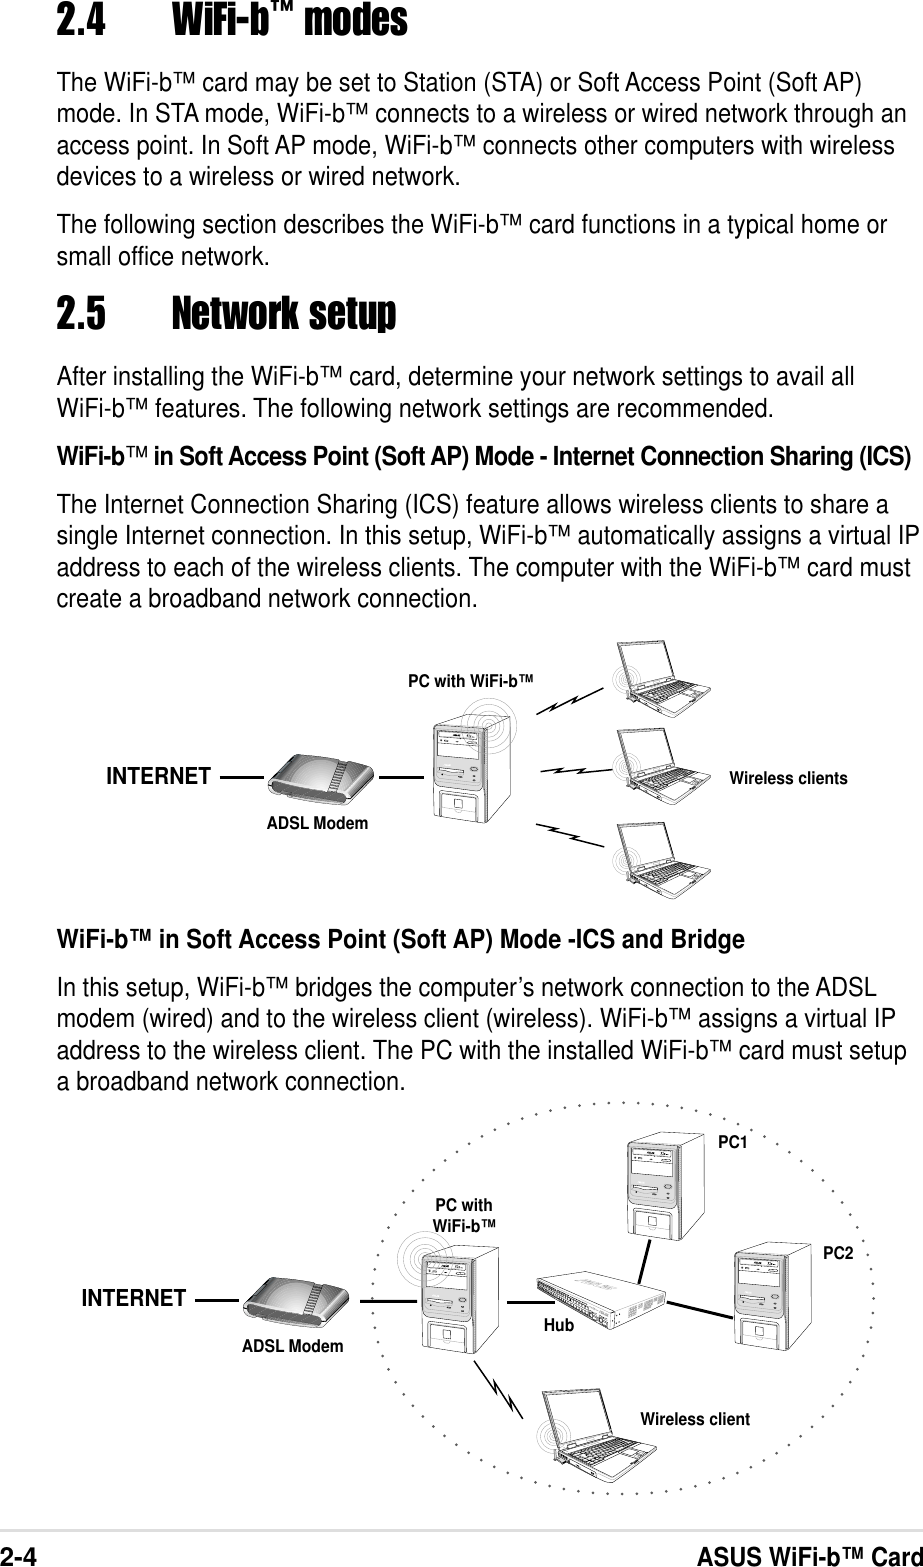 ASUS WiFi-b™ Card2-42.4 WiFi-b™ modesThe WiFi-b™ card may be set to Station (STA) or Soft Access Point (Soft AP)mode. In STA mode, WiFi-b™ connects to a wireless or wired network through anaccess point. In Soft AP mode, WiFi-b™ connects other computers with wirelessdevices to a wireless or wired network.The following section describes the WiFi-b™ card functions in a typical home orsmall office network.2.5 Network setupAfter installing the WiFi-b™ card, determine your network settings to avail allWiFi-b™ features. The following network settings are recommended.WiFi-b™ in Soft Access Point (Soft AP) Mode - Internet Connection Sharing (ICS)The Internet Connection Sharing (ICS) feature allows wireless clients to share asingle Internet connection. In this setup, WiFi-b™ automatically assigns a virtual IPaddress to each of the wireless clients. The computer with the WiFi-b™ card mustcreate a broadband network connection.ADSL ModemWireless clientsINTERNETPC with WiFi-b™WiFi-b™ in Soft Access Point (Soft AP) Mode -ICS and BridgeIn this setup, WiFi-b™ bridges the computer’s network connection to the ADSLmodem (wired) and to the wireless client (wireless). WiFi-b™ assigns a virtual IPaddress to the wireless client. The PC with the installed WiFi-b™ card must setupa broadband network connection.ADSL Modem HubPC1PC2Wireless clientINTERNETPC withWiFi-b™